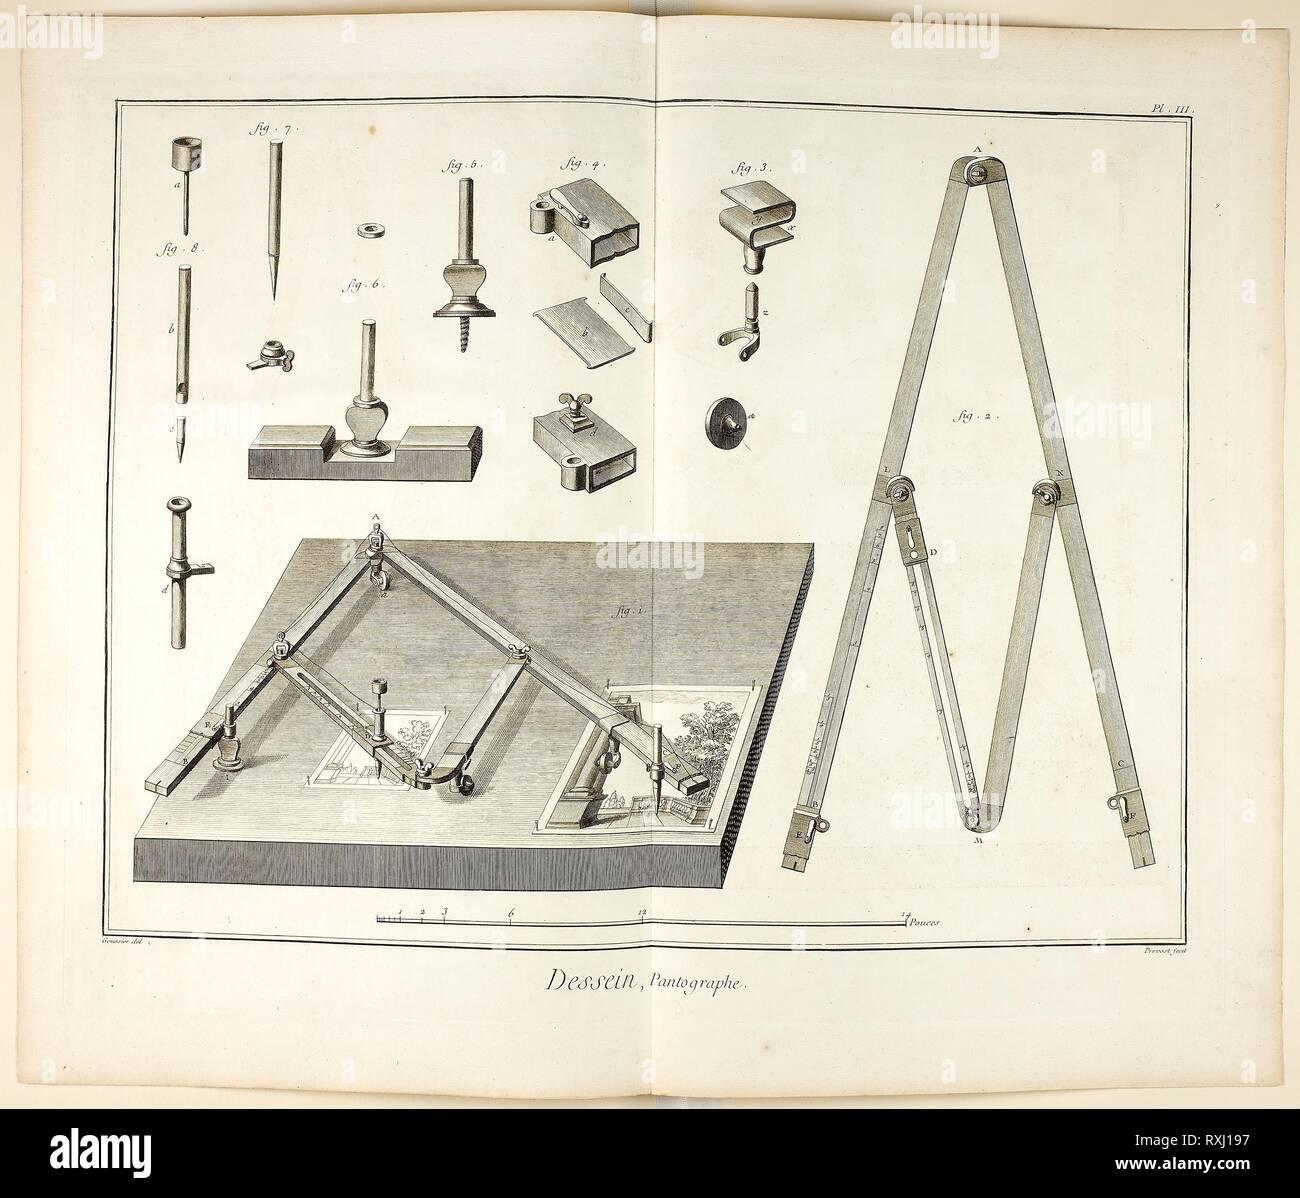 Design: Pantograph, from Encyclopédie. Benoît-Louis Prévost (French, c. 1735-1809); after Louis-Jaques Goussier (French, 1722-1799); published by André le Breton (French, 1708-1779), Michel-Antoine David (French, c. 1707-1769), Laurent Durand (French, 1712-1763), and Antoine-Claude Briasson (French, 1700-1775). Date: 1762-1777. Dimensions: 314 × 410 mm (image); 345 × 440 mm (plate); 411 × 480 mm (sheet). Engraving on cream laid paper. Origin: France. Museum: The Chicago Art Institute. Stock Photo